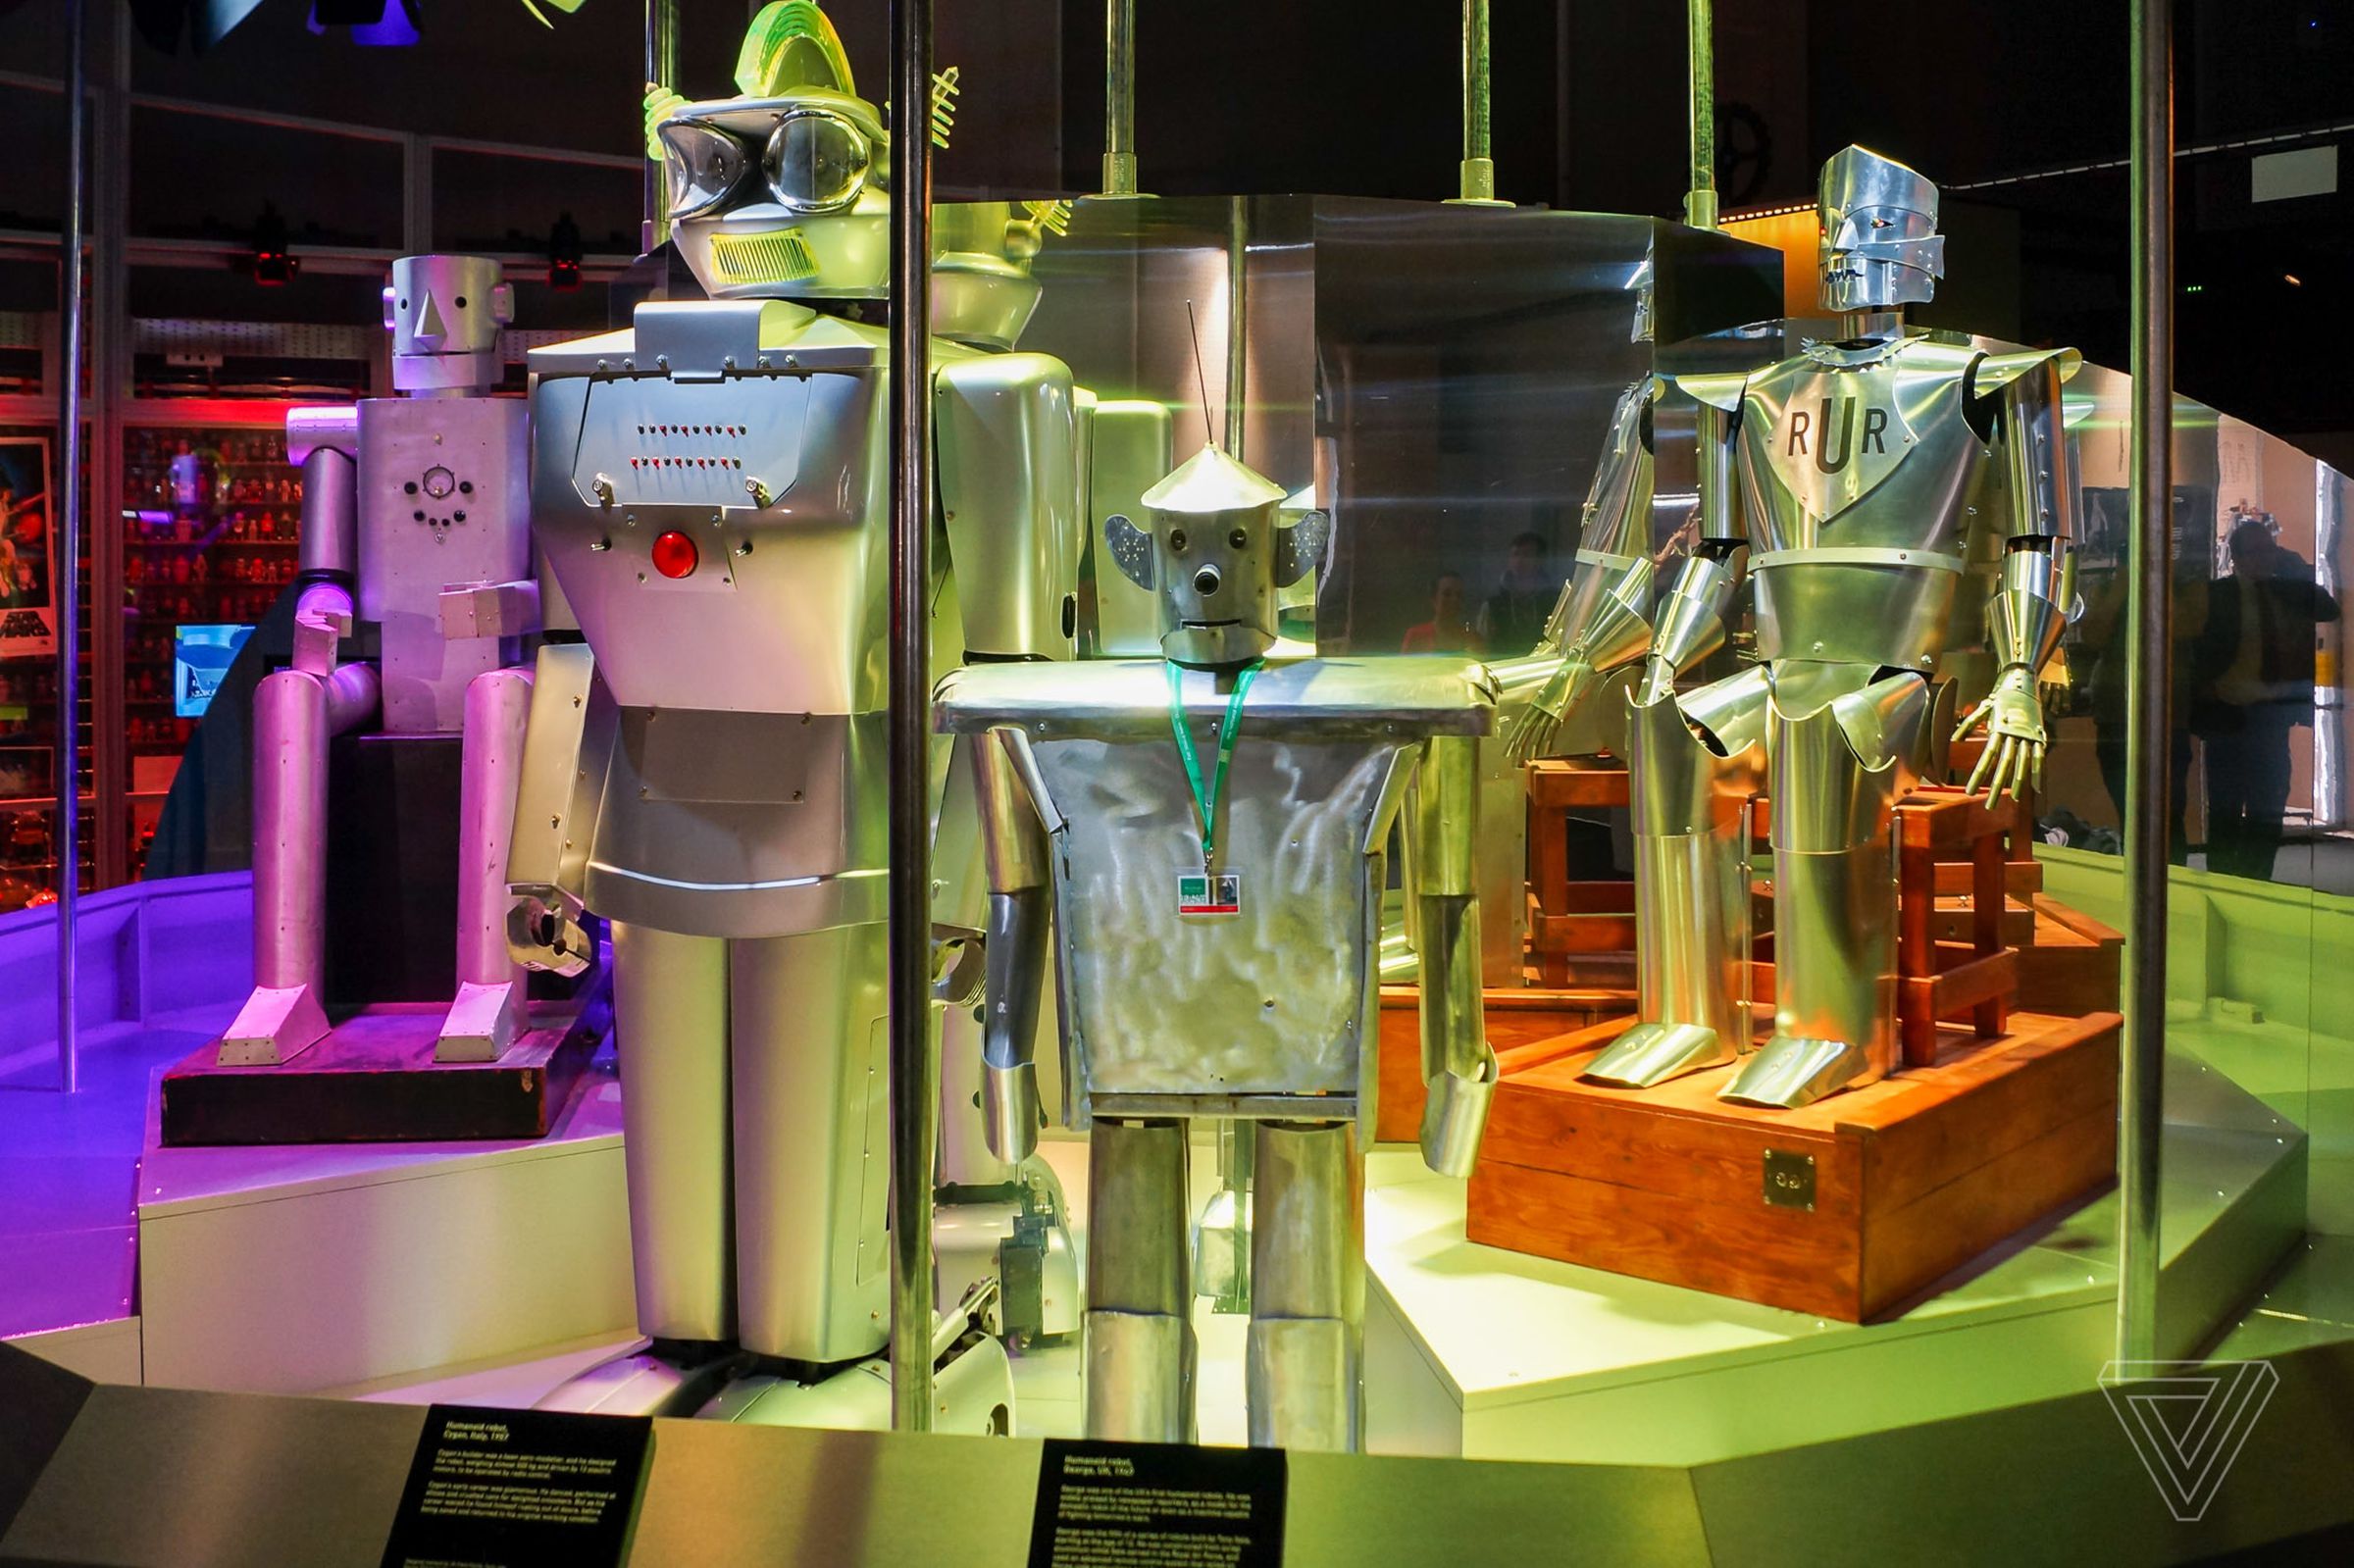 Robots in pictures: London Science Museum